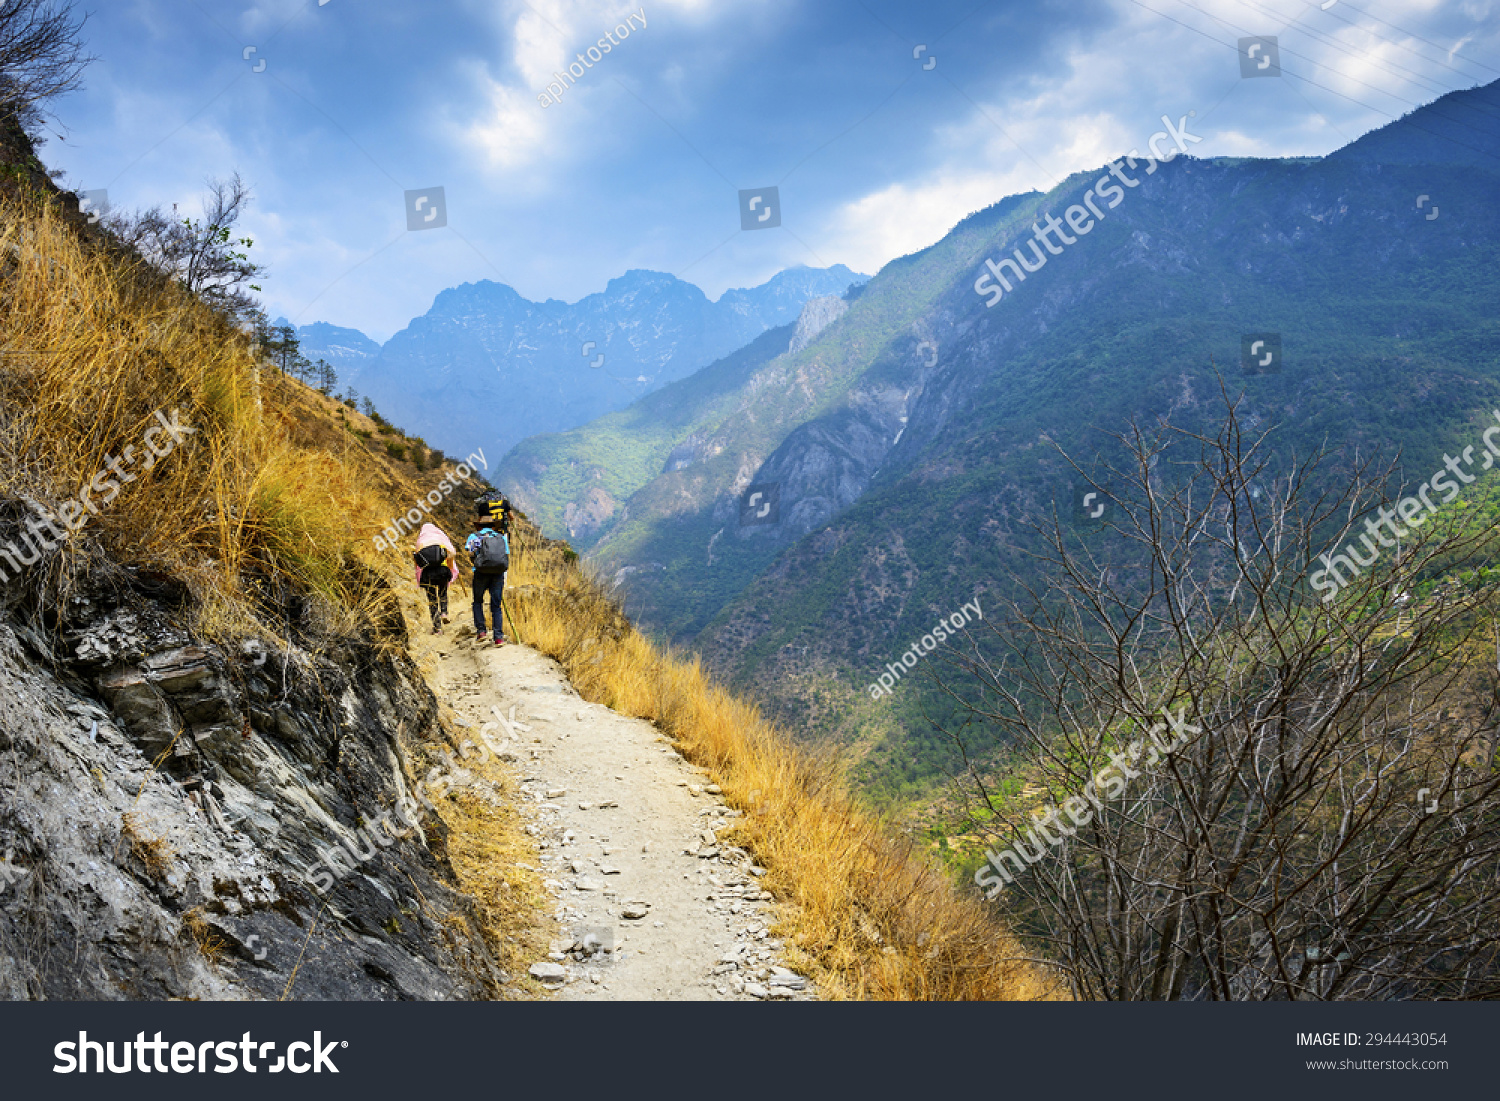 Hiking path (the high road) of Tiger Leaping Gorge. Travelers hiking in the mountains. Located 60 kilometres north of Lijiang City, Yunnan Province, China. #294443054